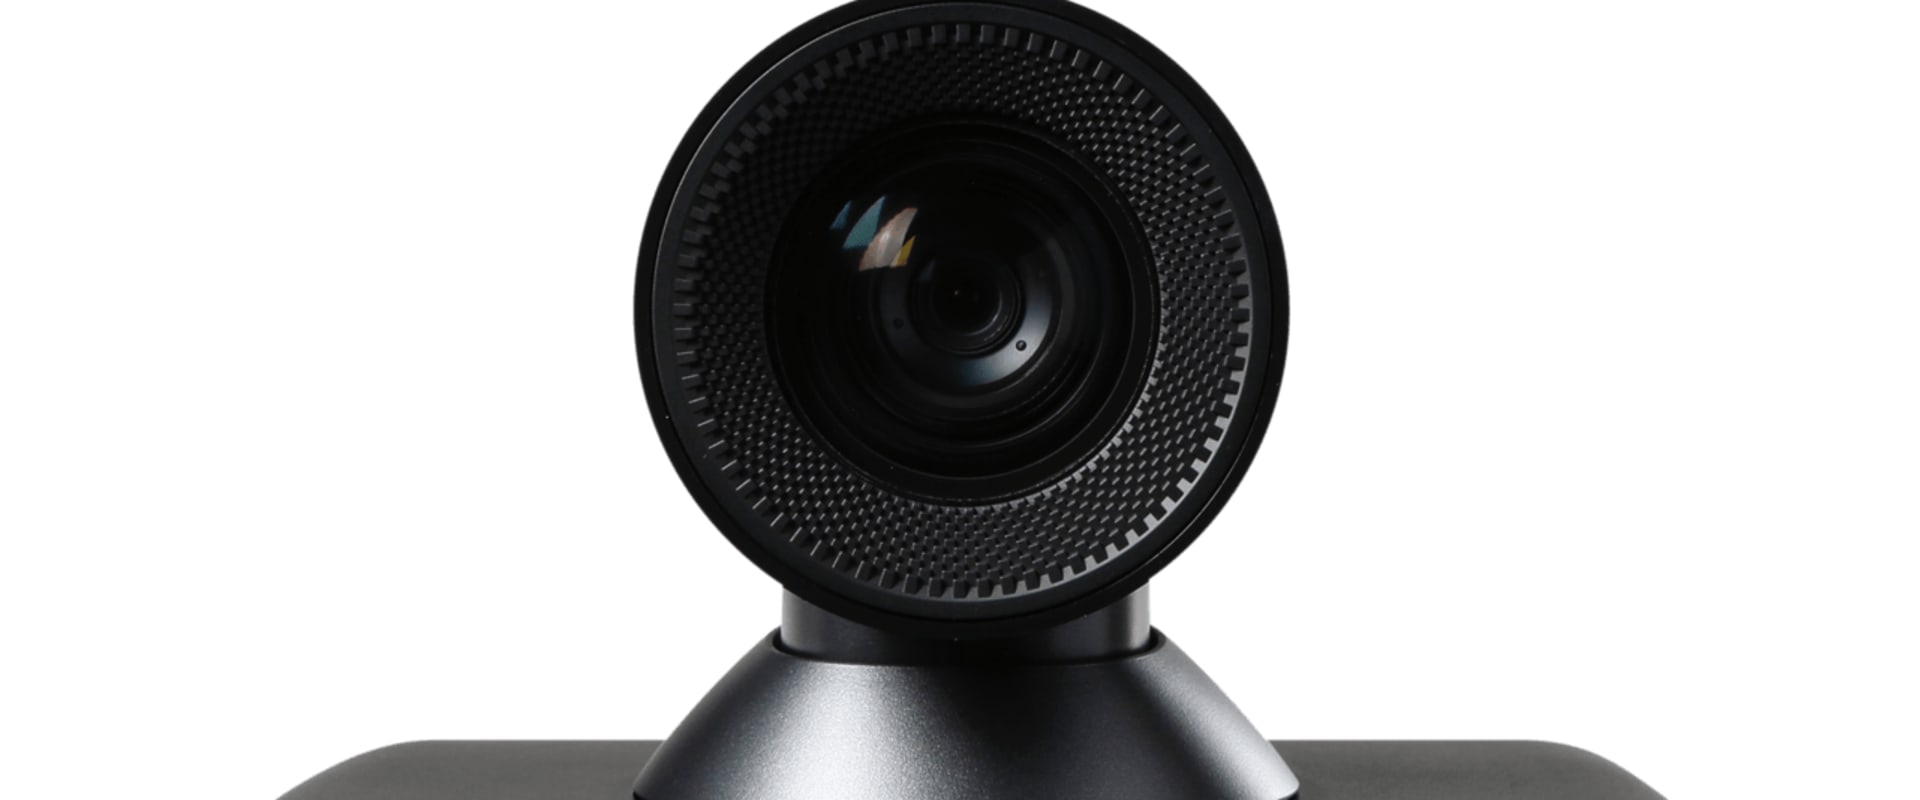 Compatibility of Webcams with Video Conferencing Software